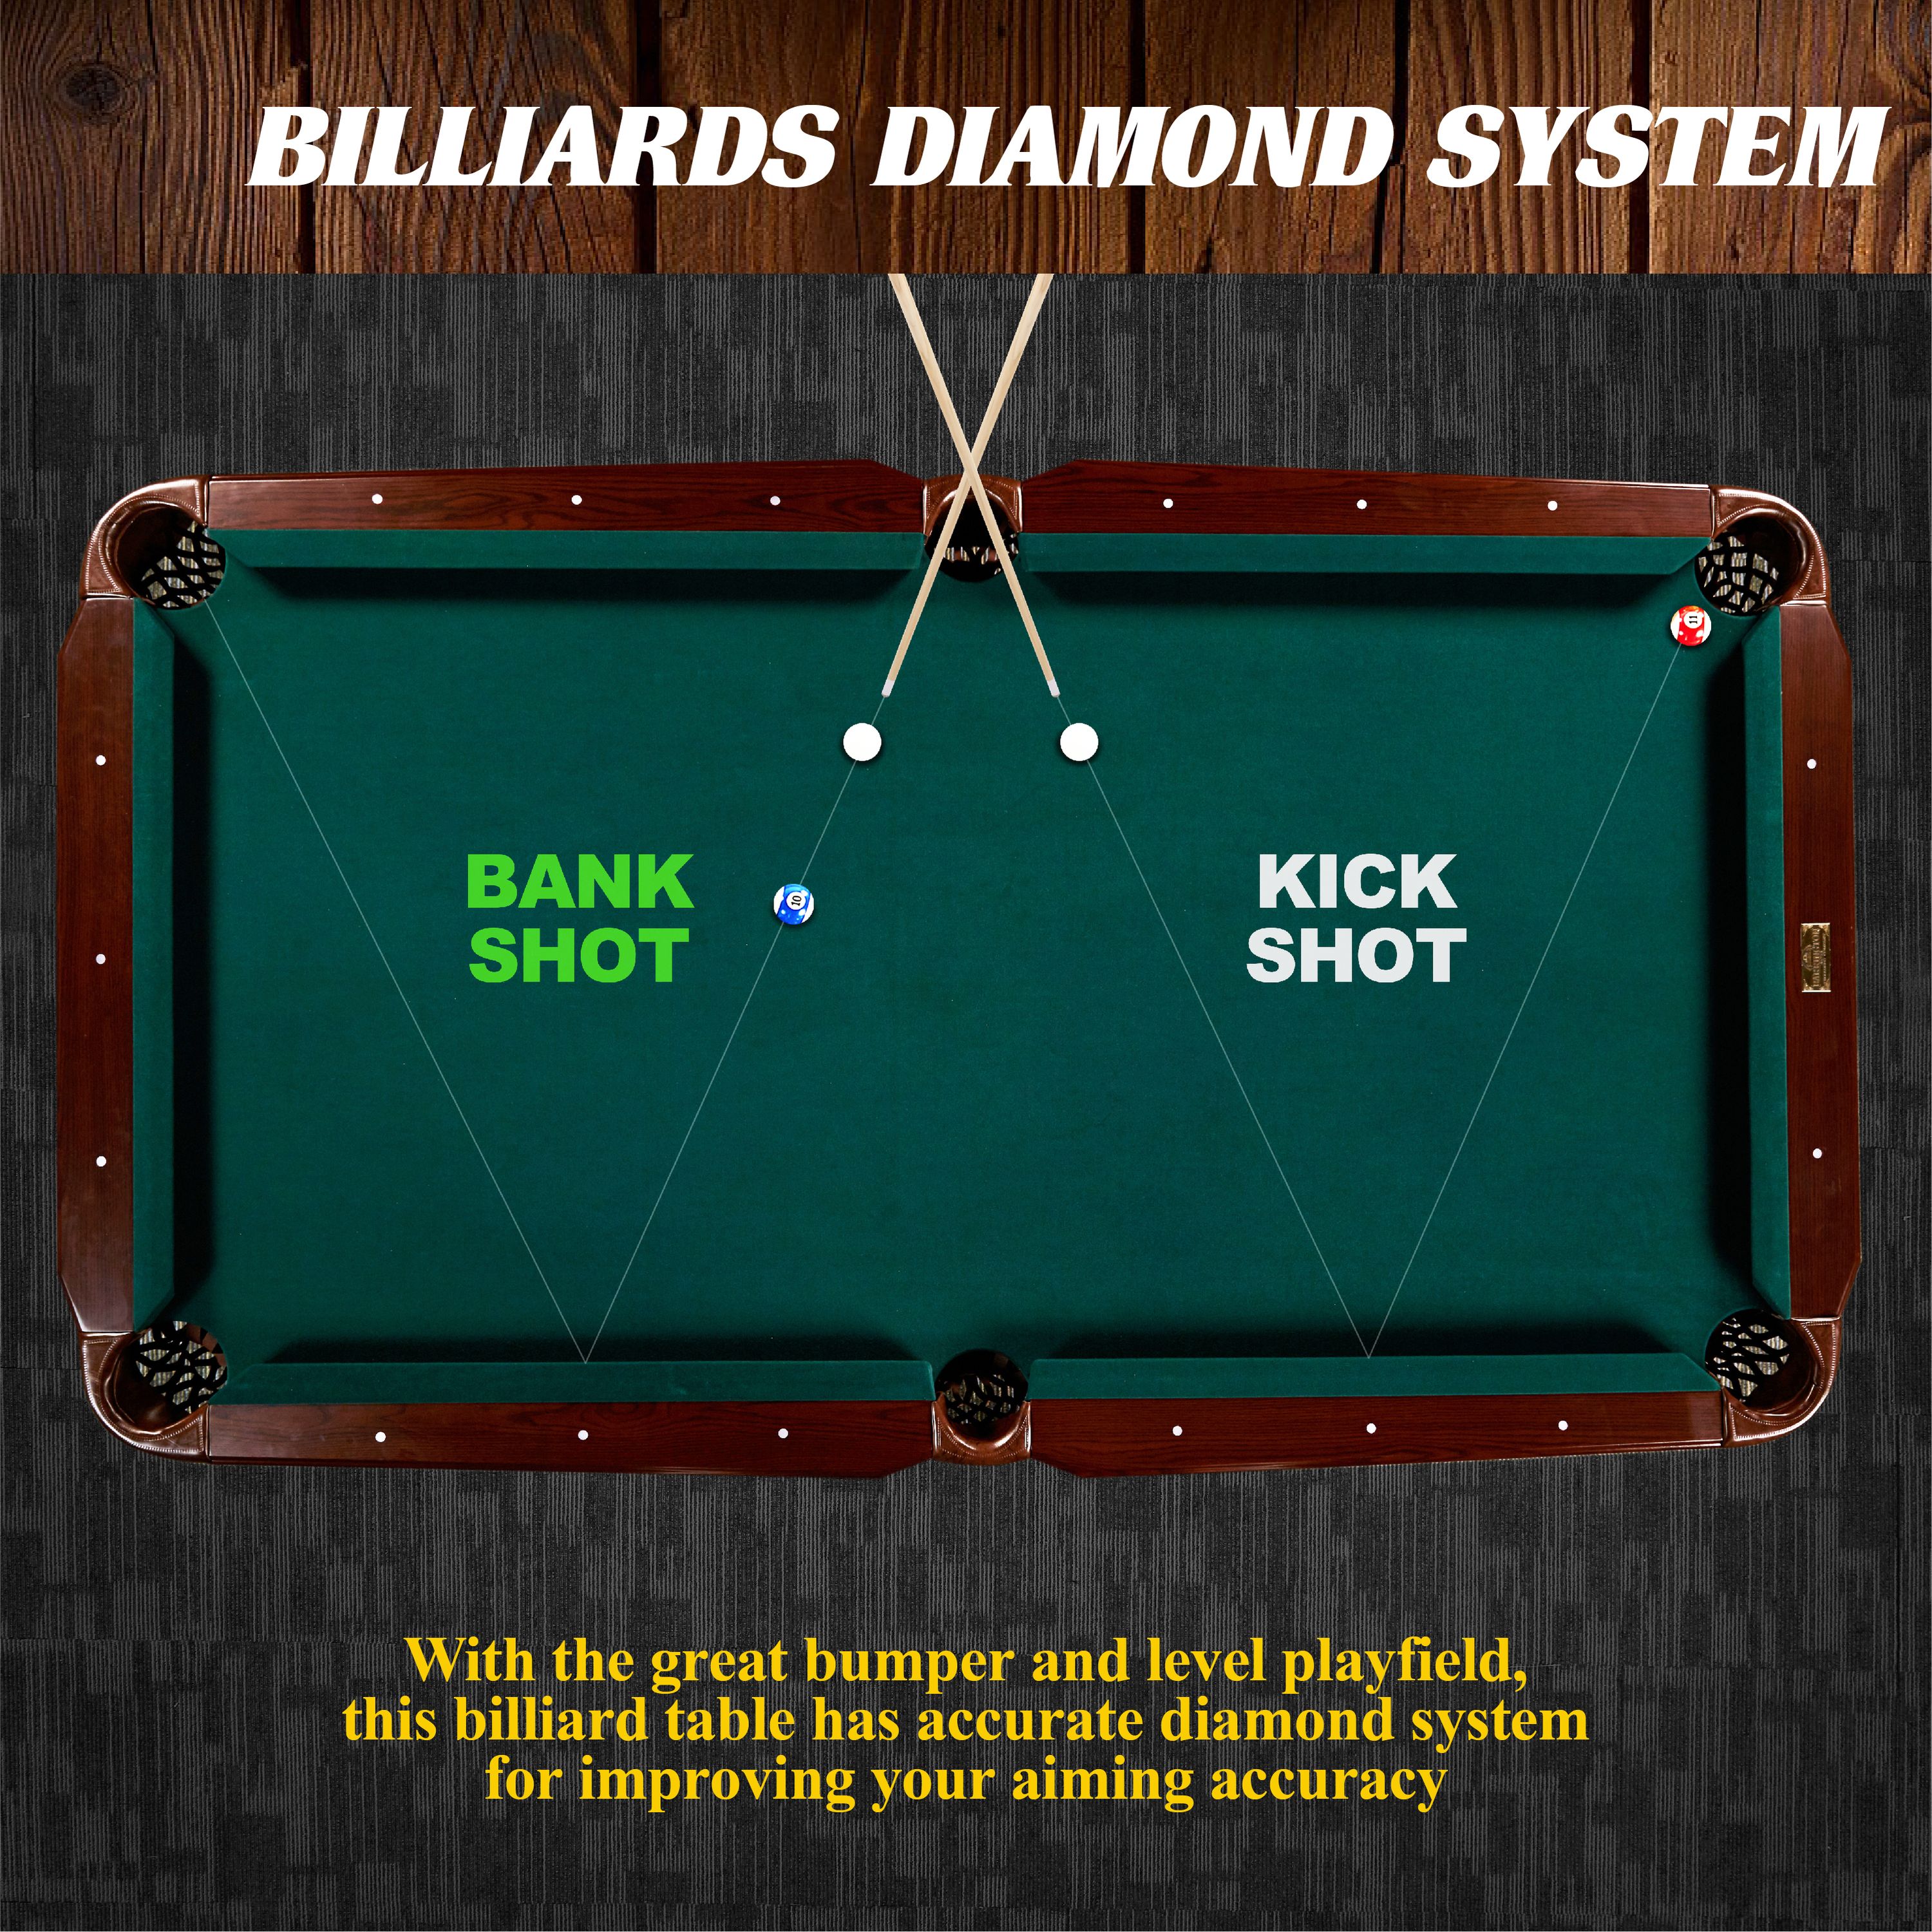 Barrington Billiards 90" Ball and Claw Leg Pool Table with Cue Rack, Dartboard Set, Green, New - image 12 of 13